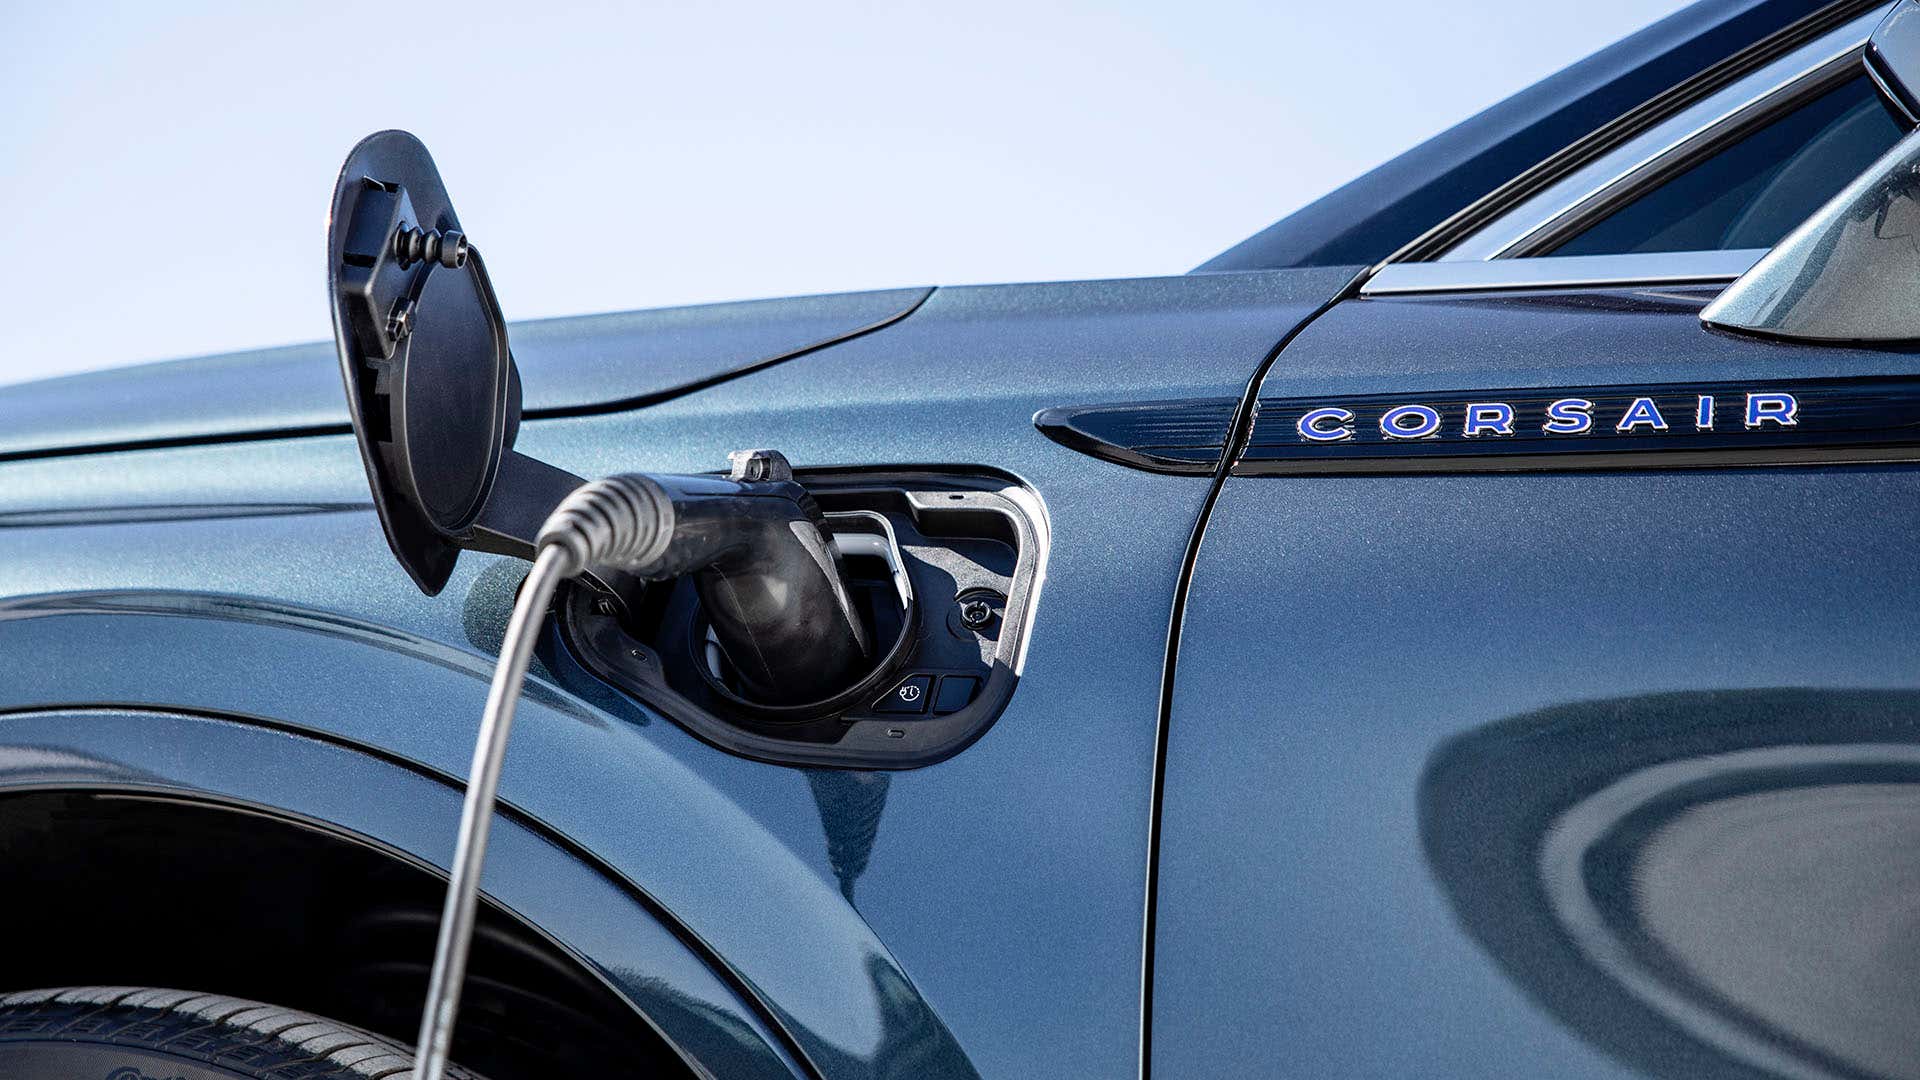 The new Lincoln Corsair is offered as a plug-in hybrid.